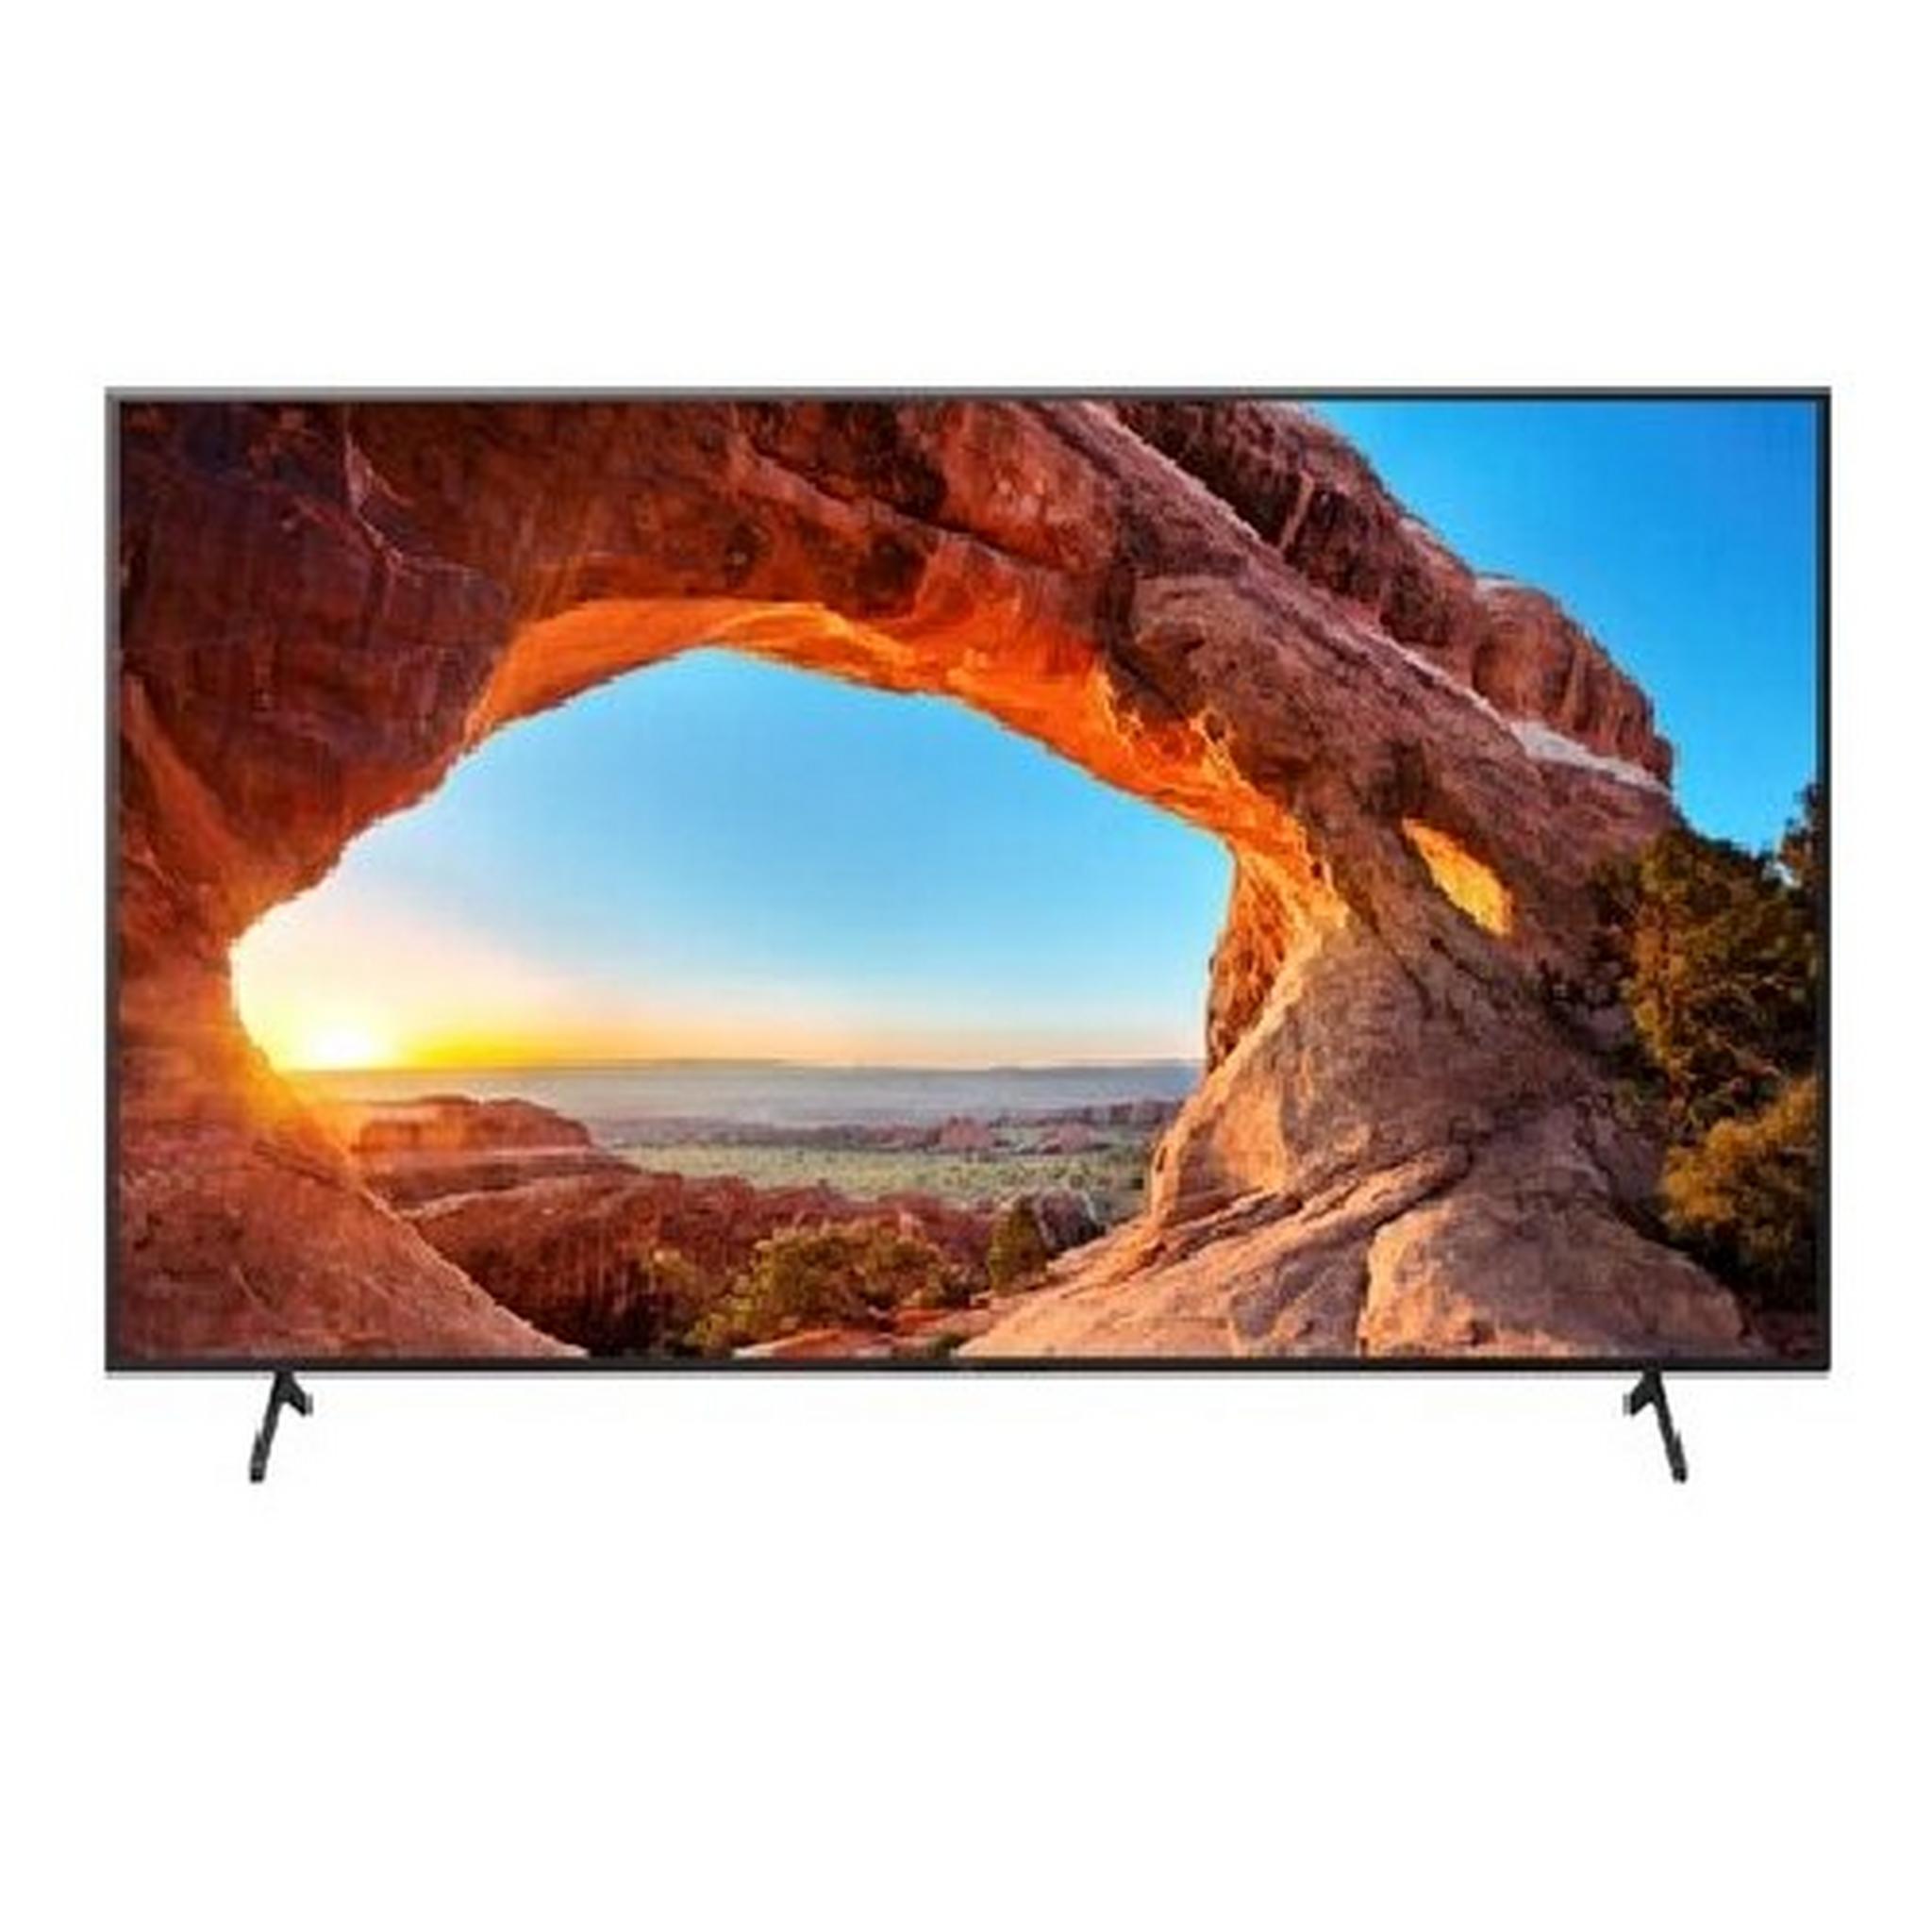 Sony Series X85J 85-Inches LED Android 4K HDR TV (KD-85X85J)